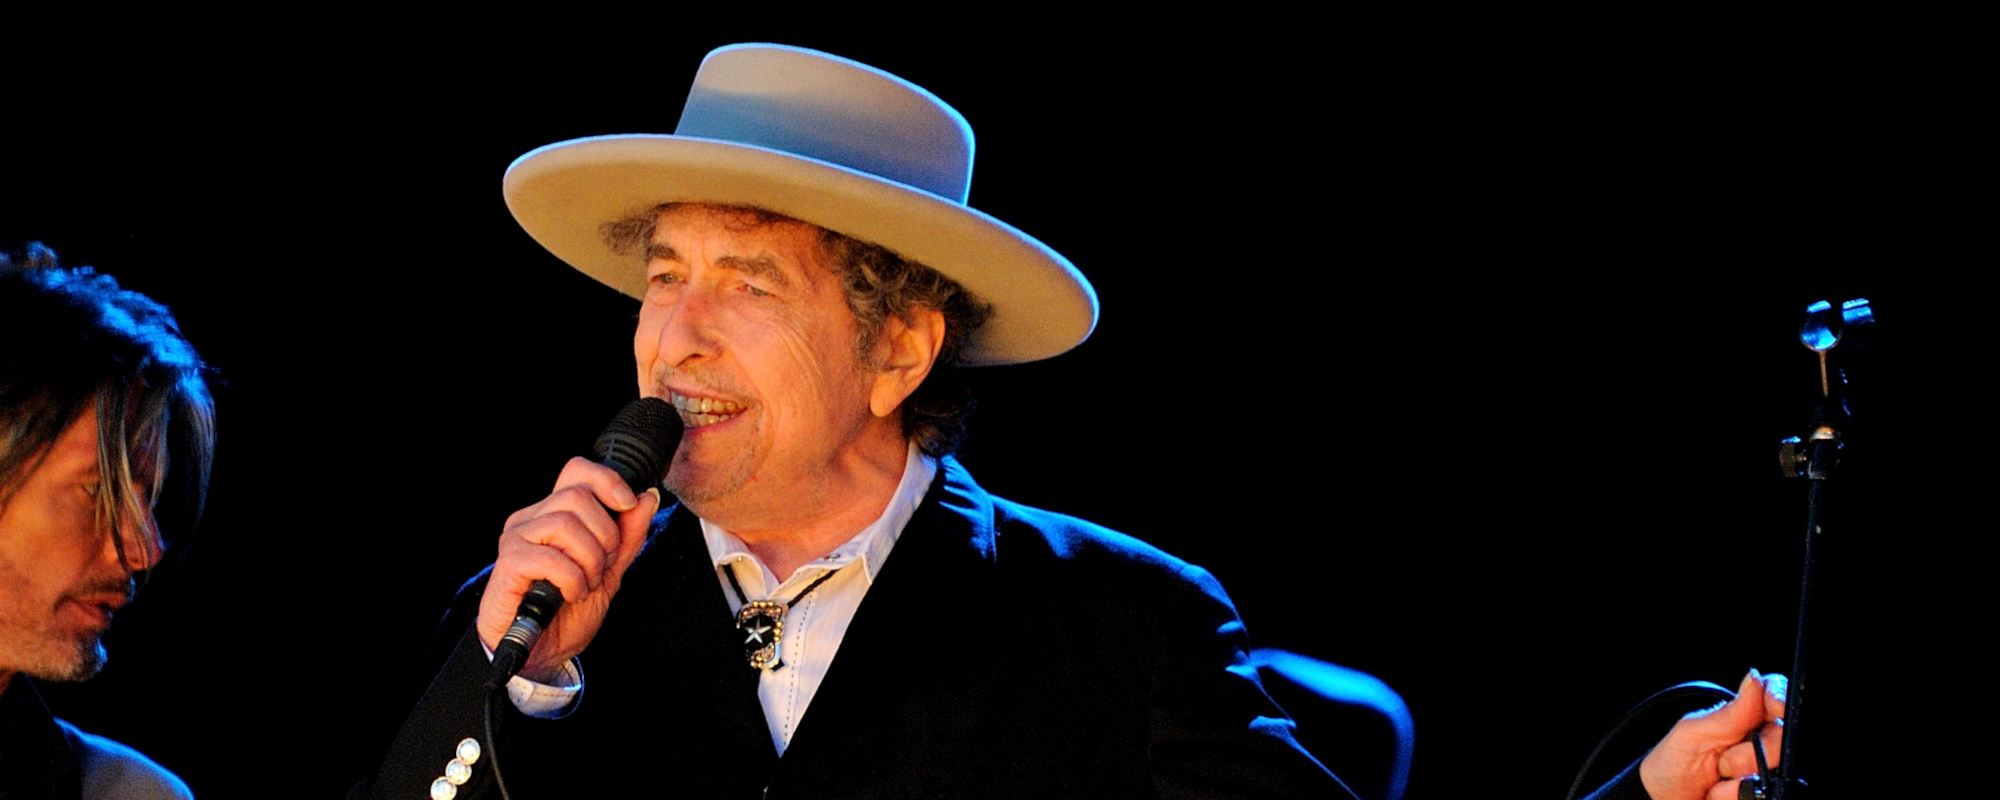 On This Day in Music History: Bob Dylan Wins a Nobel Prize